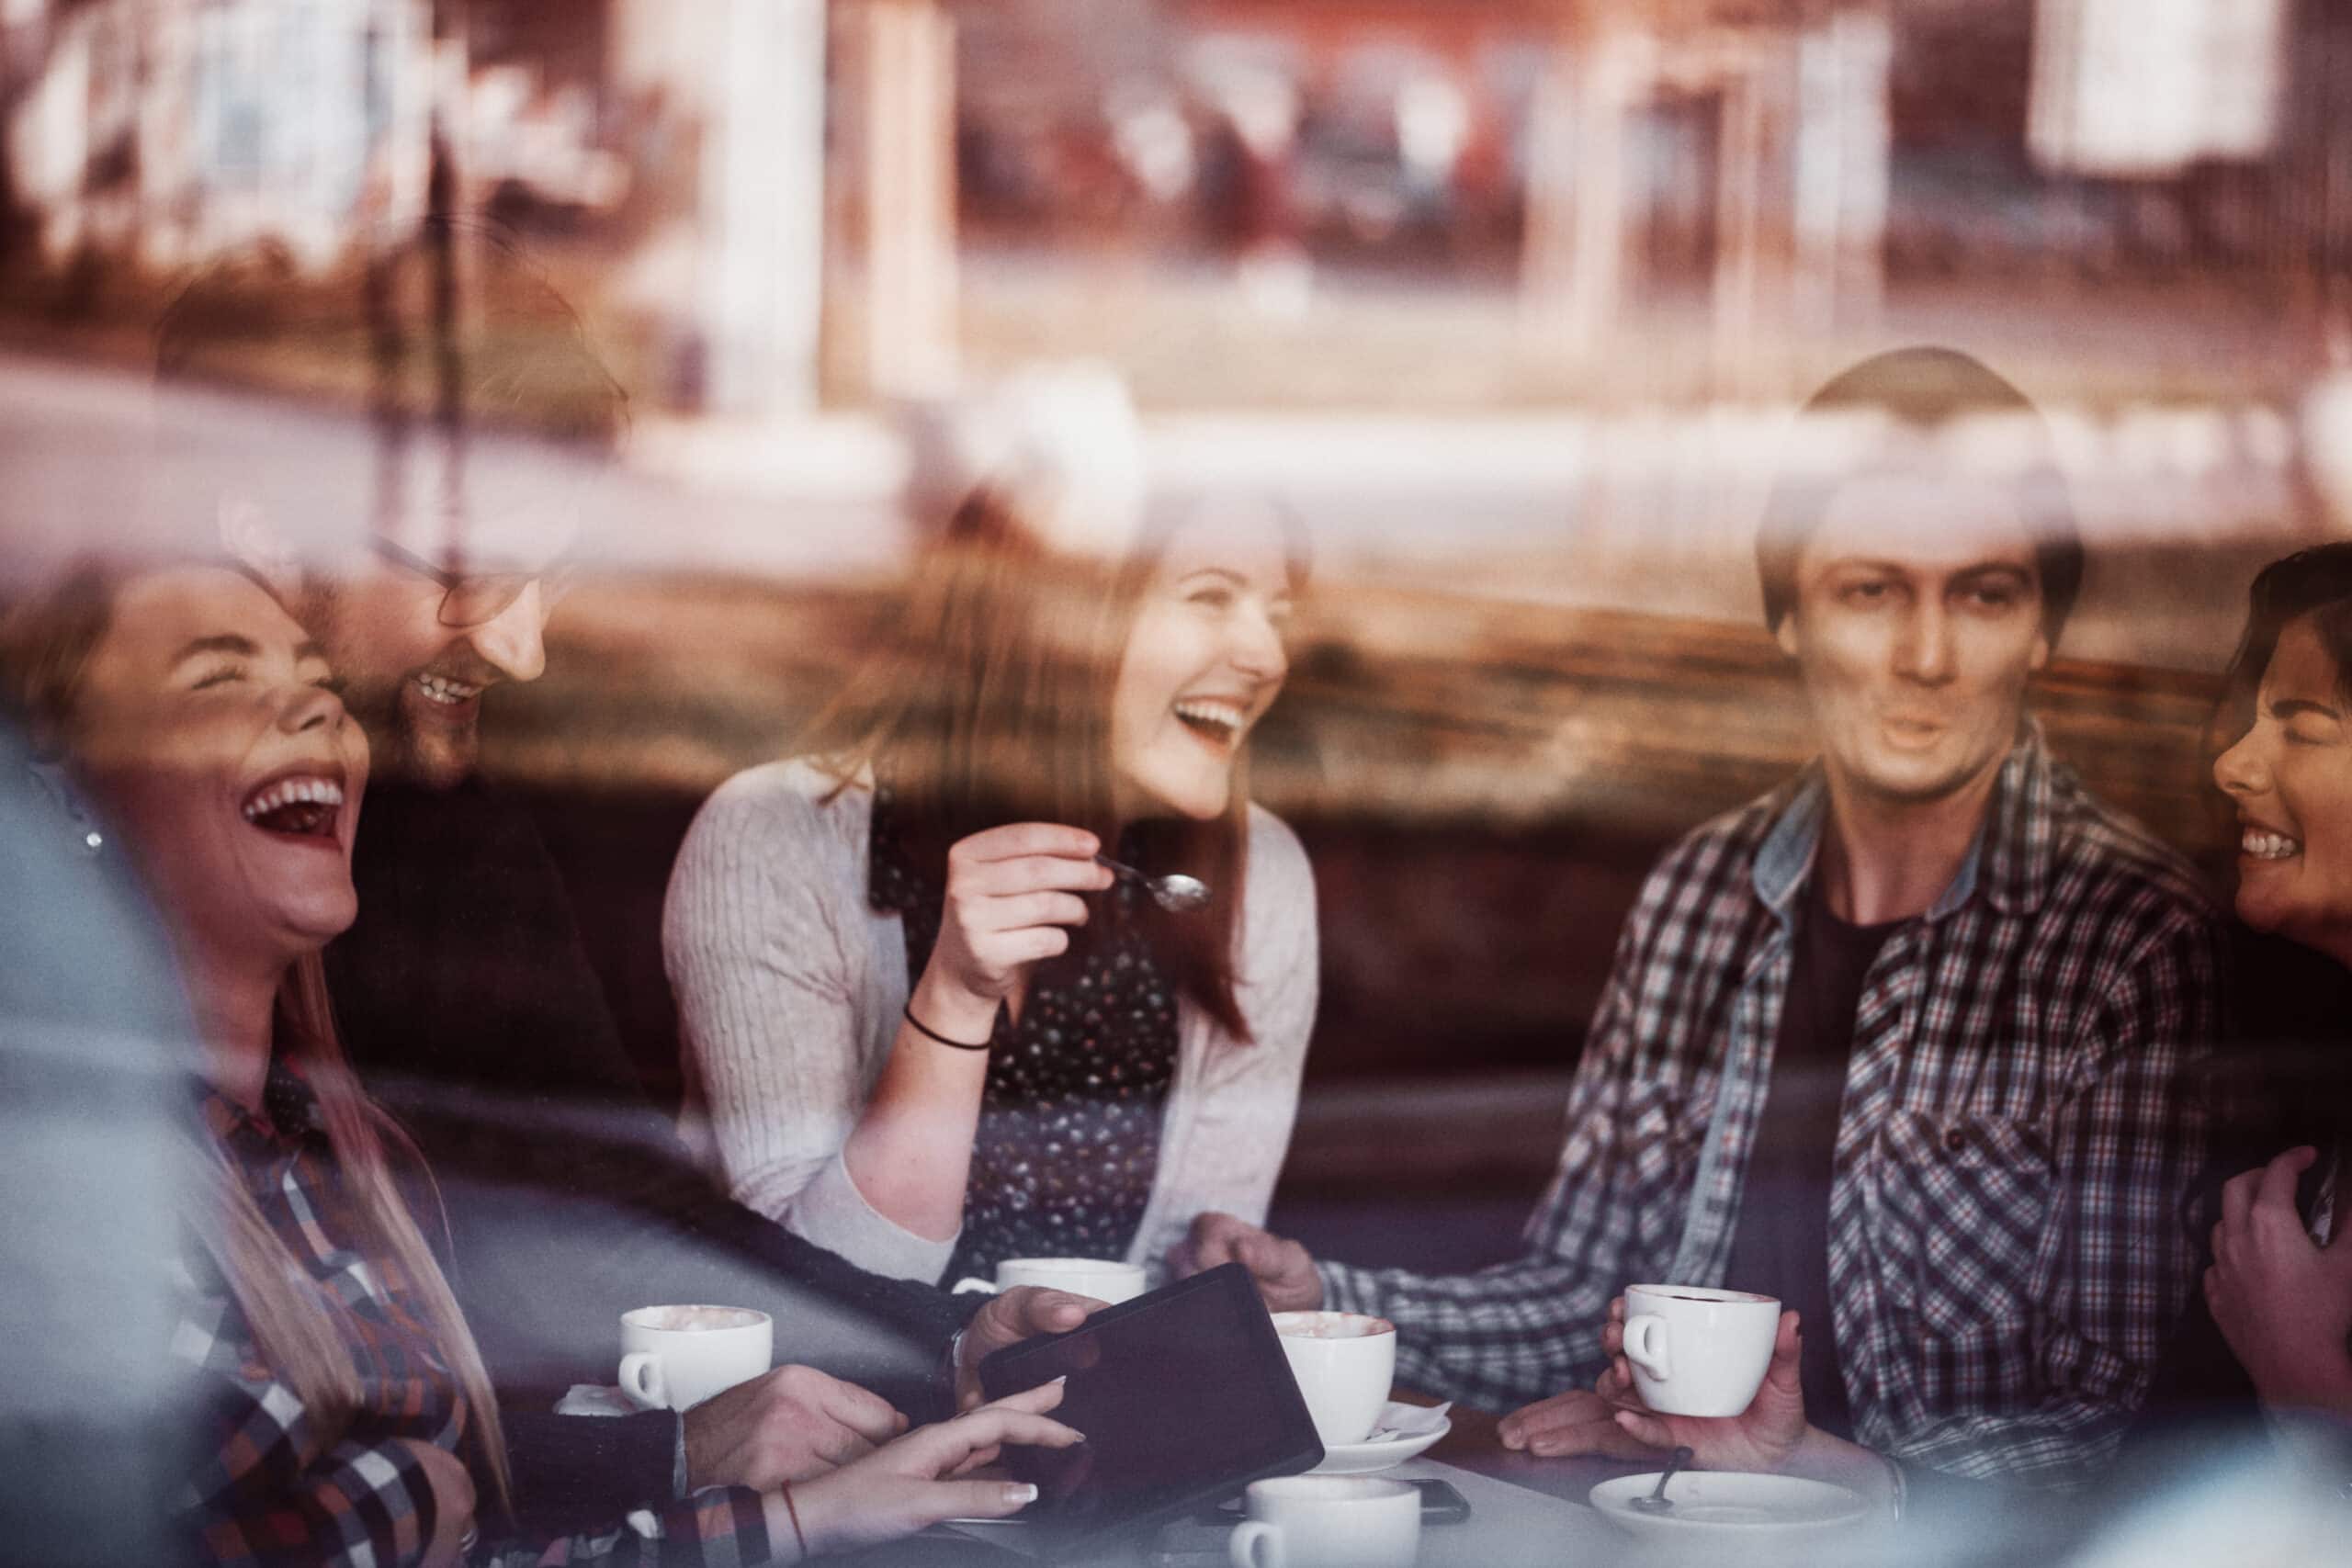 Stock image of friends at a coffee shop - Start your property journey on Share to Buy!